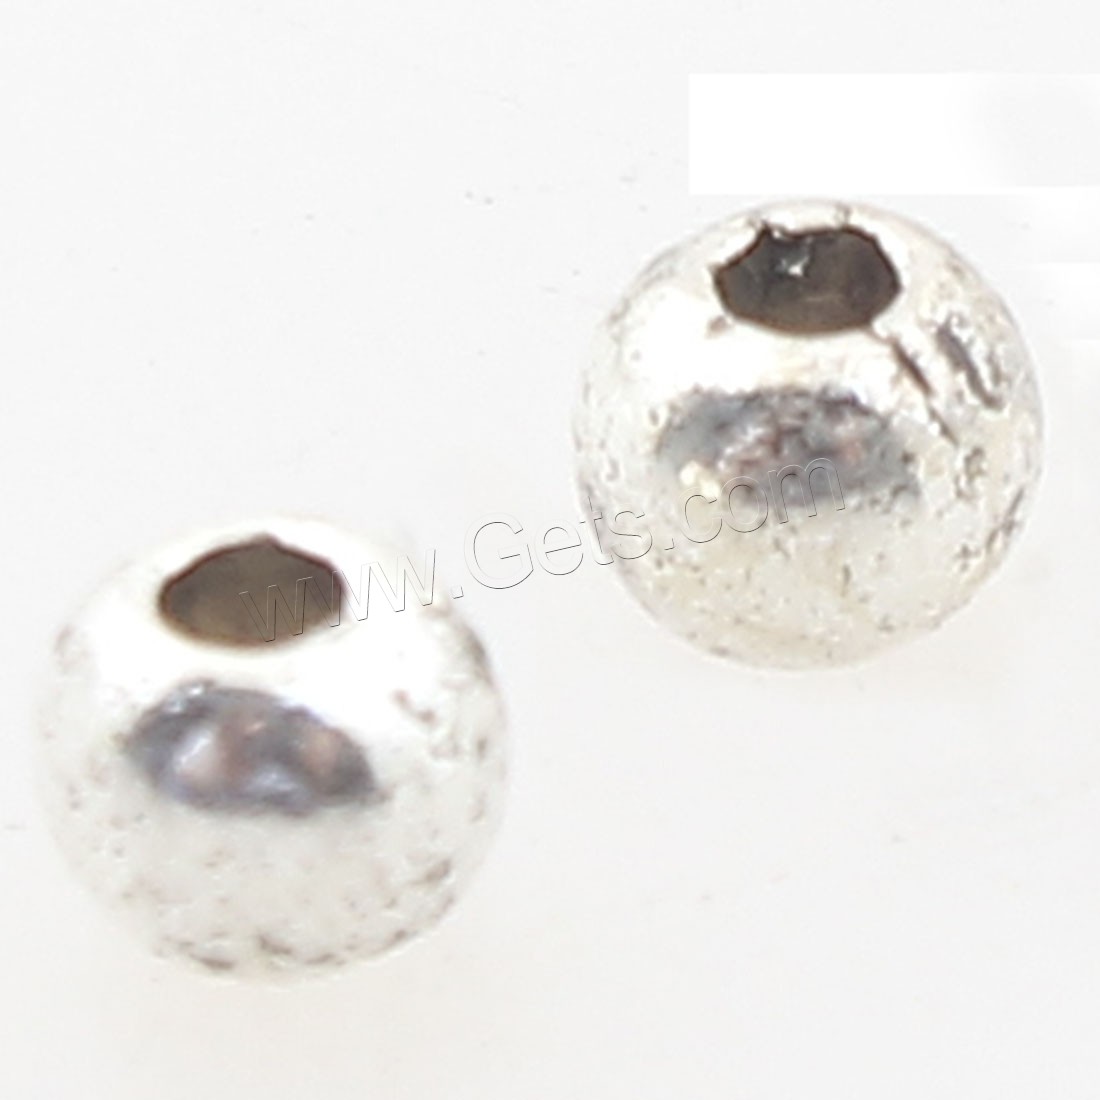 Zinc Alloy Jewelry Beads, antique silver color plated, 3x3mm, Hole:Approx 1mm, Approx 830PCs/Bag, Sold By Bag